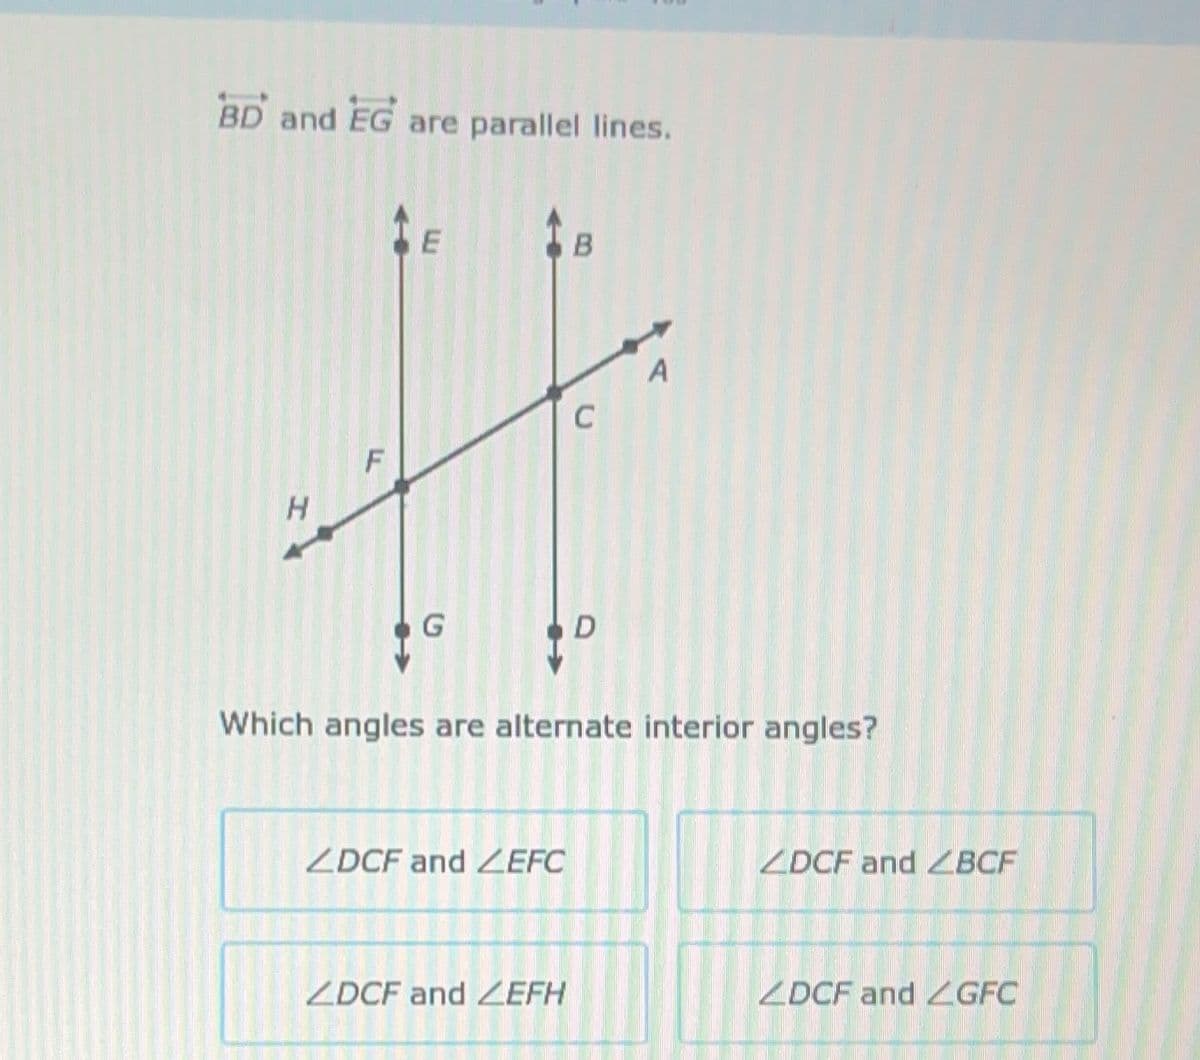 BD and EG an
H
are parallel lines.
E
G
ZDCF and ZEFC
B
ZDCF and ZEFH
C
D
Which angles are alternate interior angles?
A
ZDCF and BCF
ZDCF and GFC